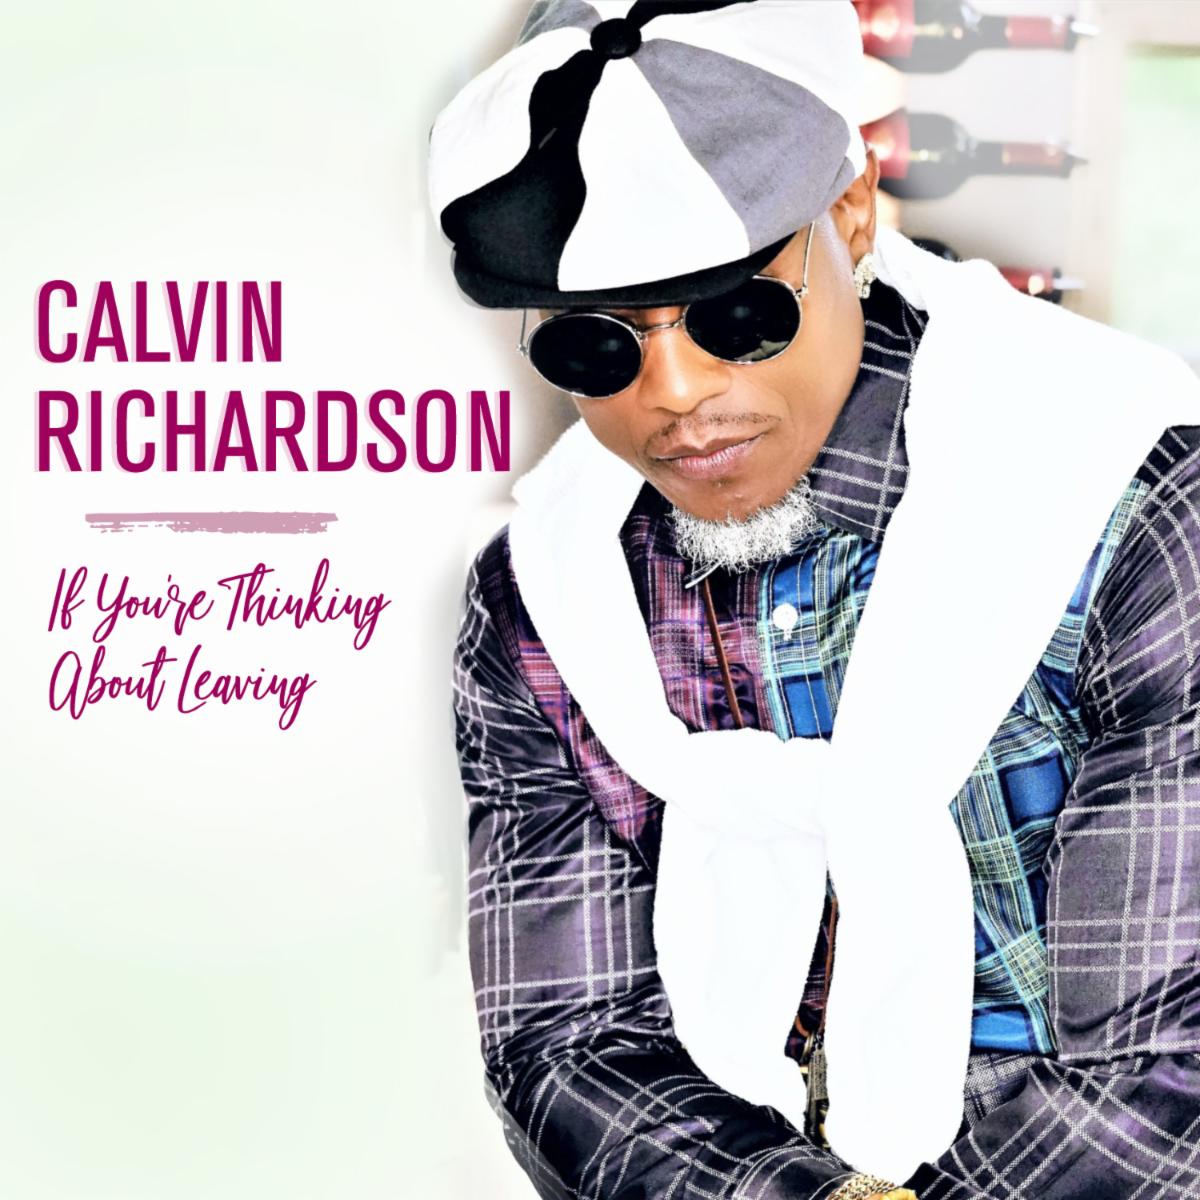 New Music: Calvin Richardson - If You're Thinking About Leaving